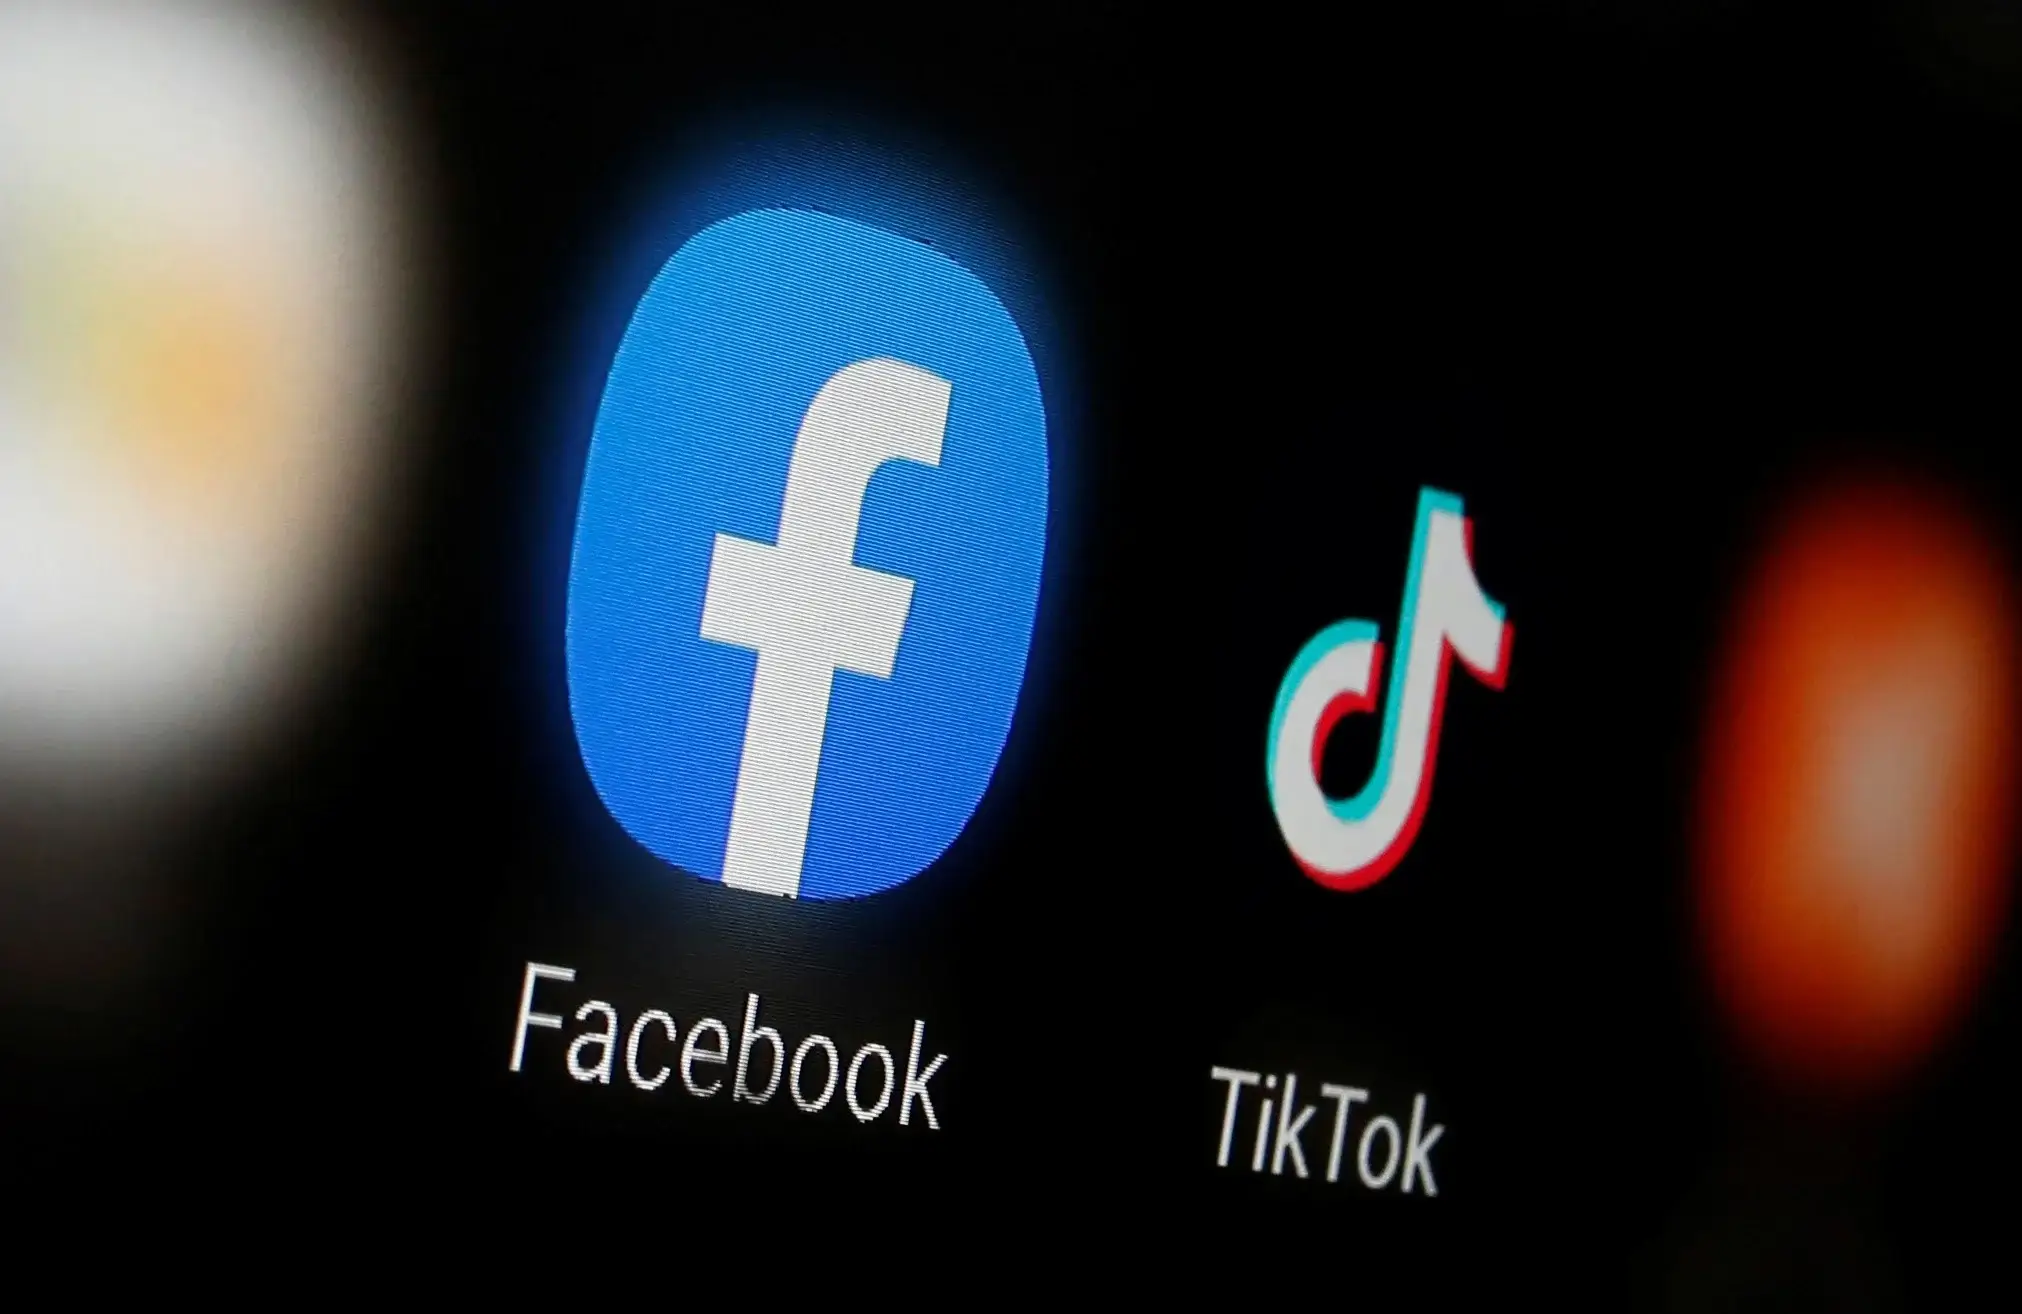 Facebook vs TikTok Ads: Key Differences and How to Use Them Together